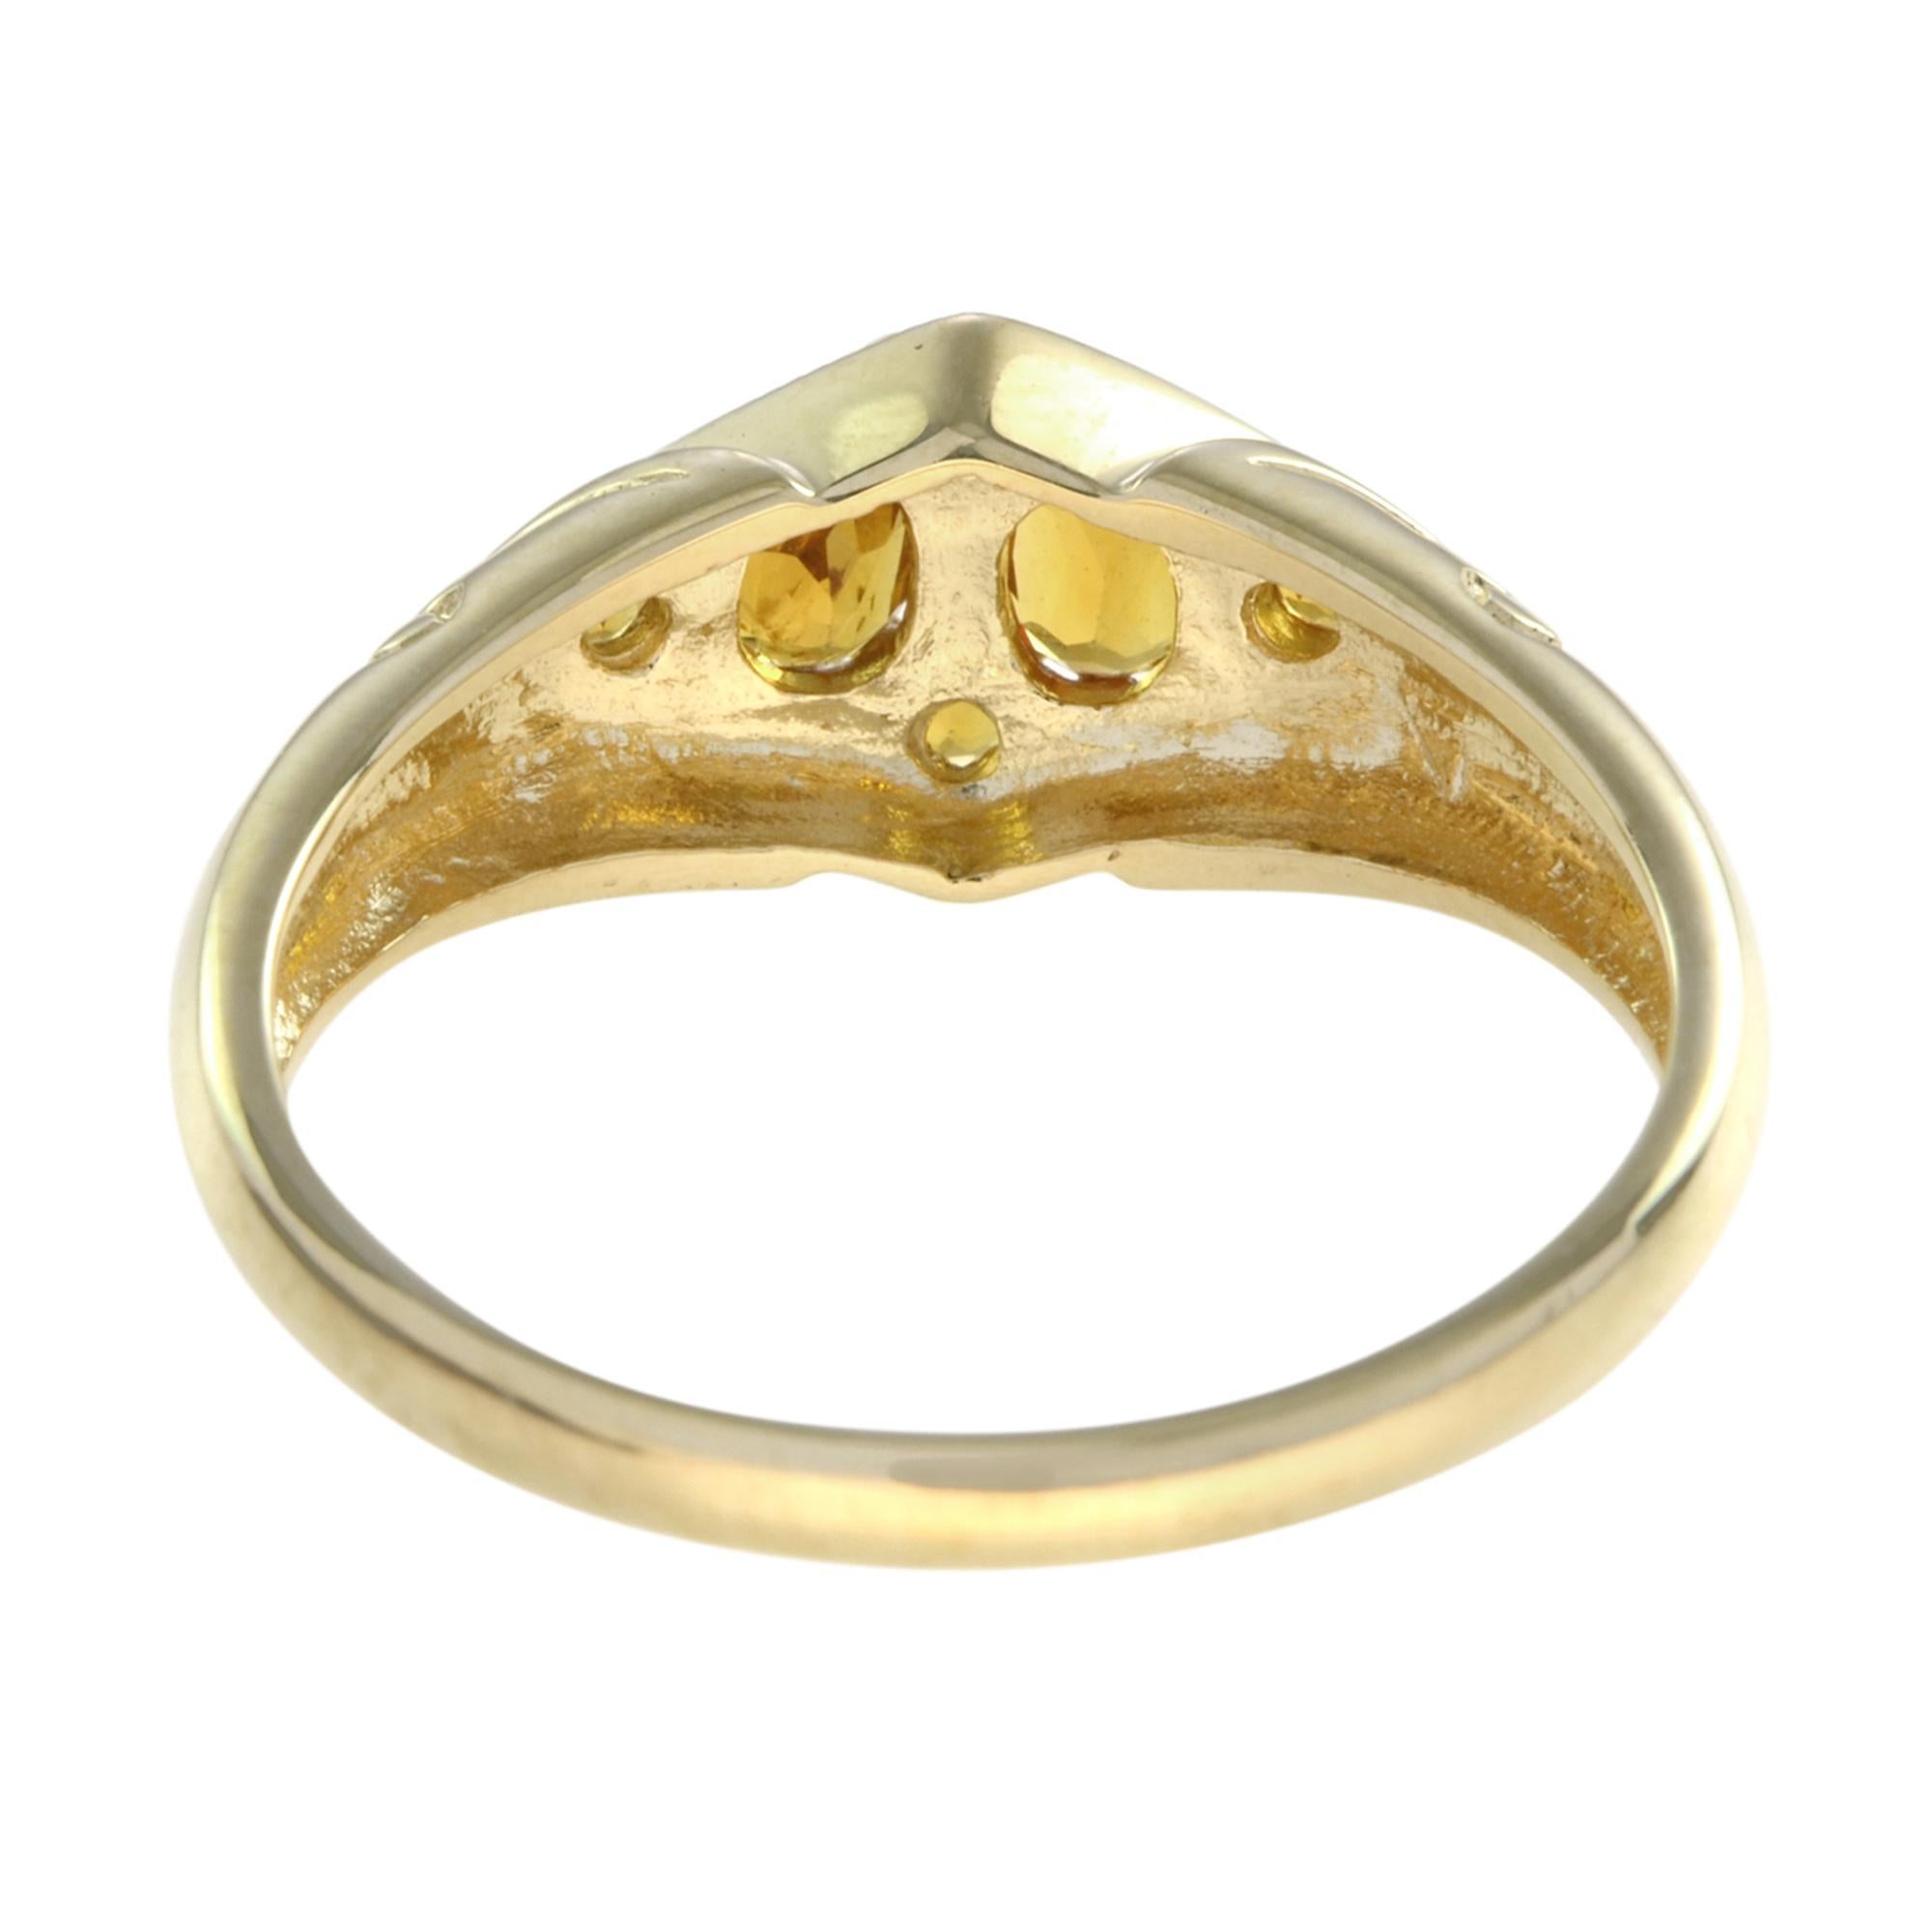 For Sale:  Vintage Style Citrine Cluster Ring in 14K Yellow Gold 5